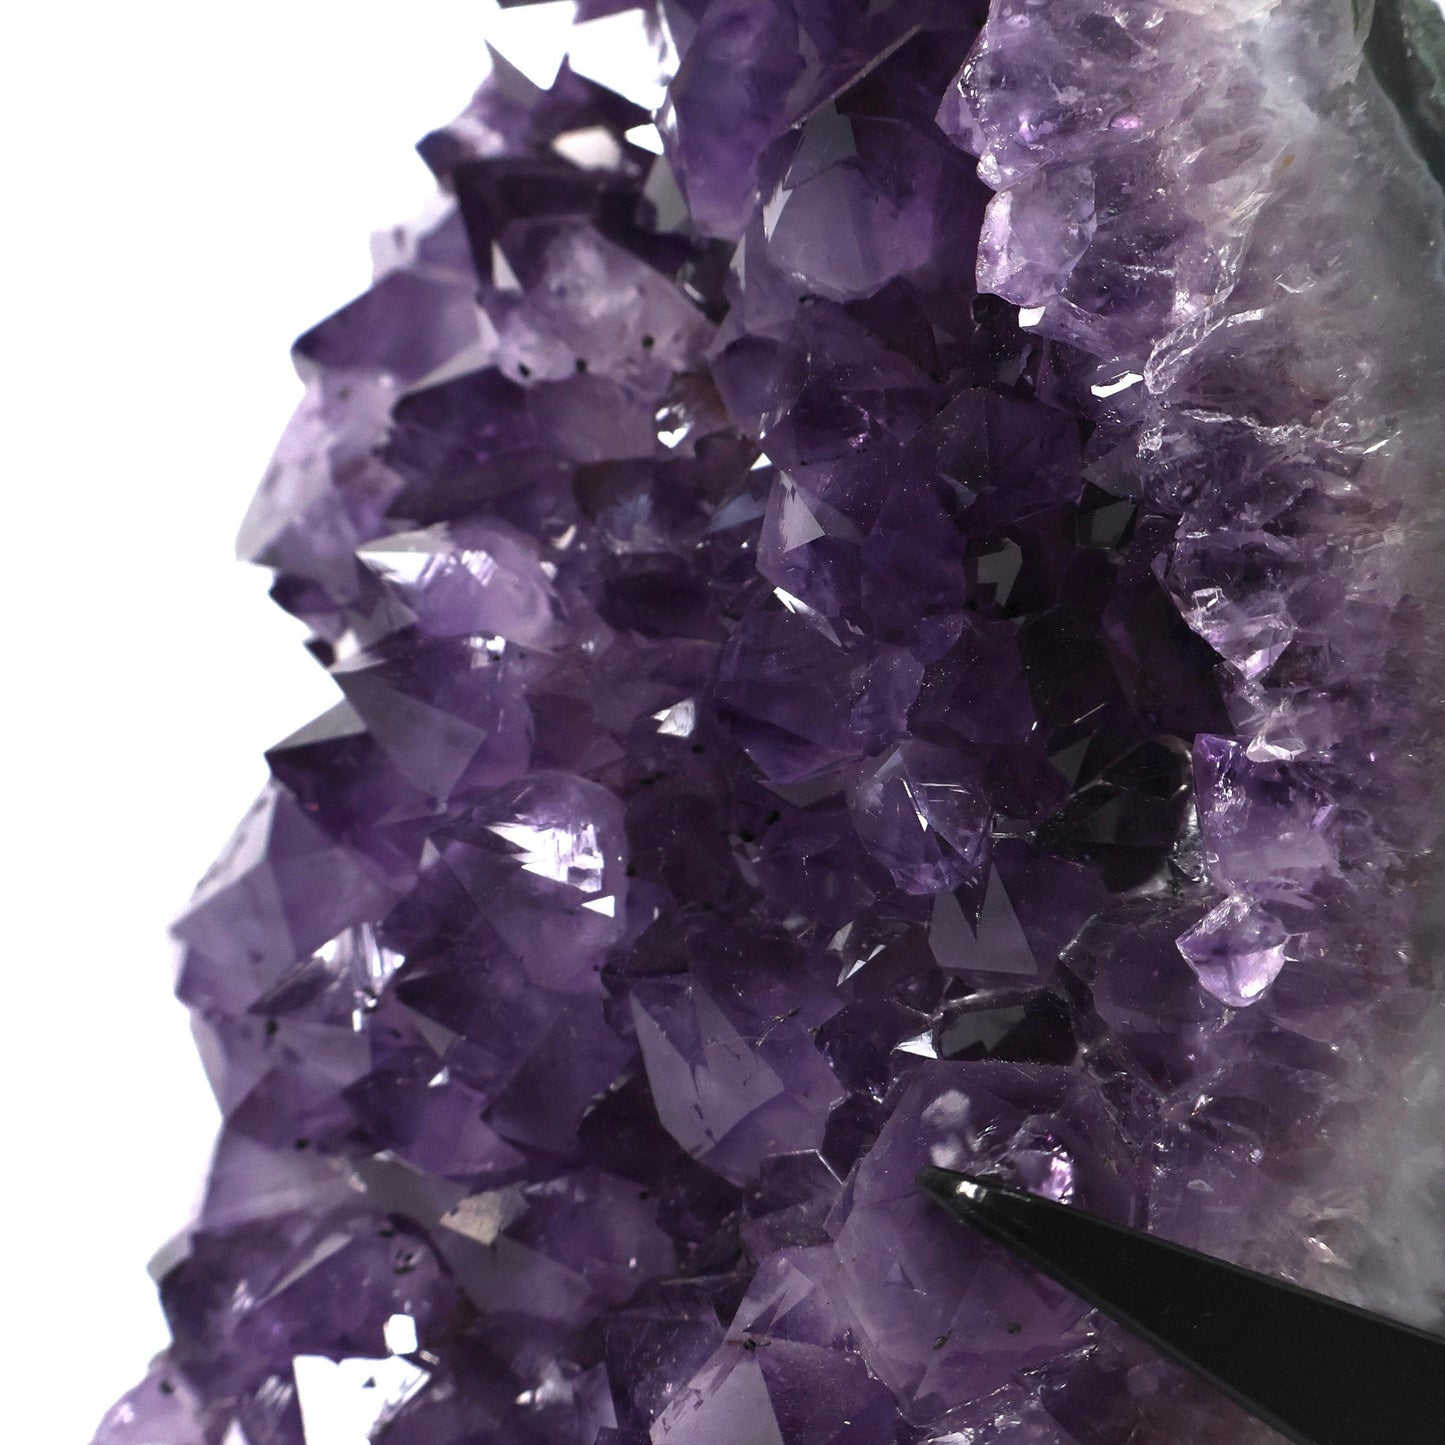 Large Amethyst Geode on Stand